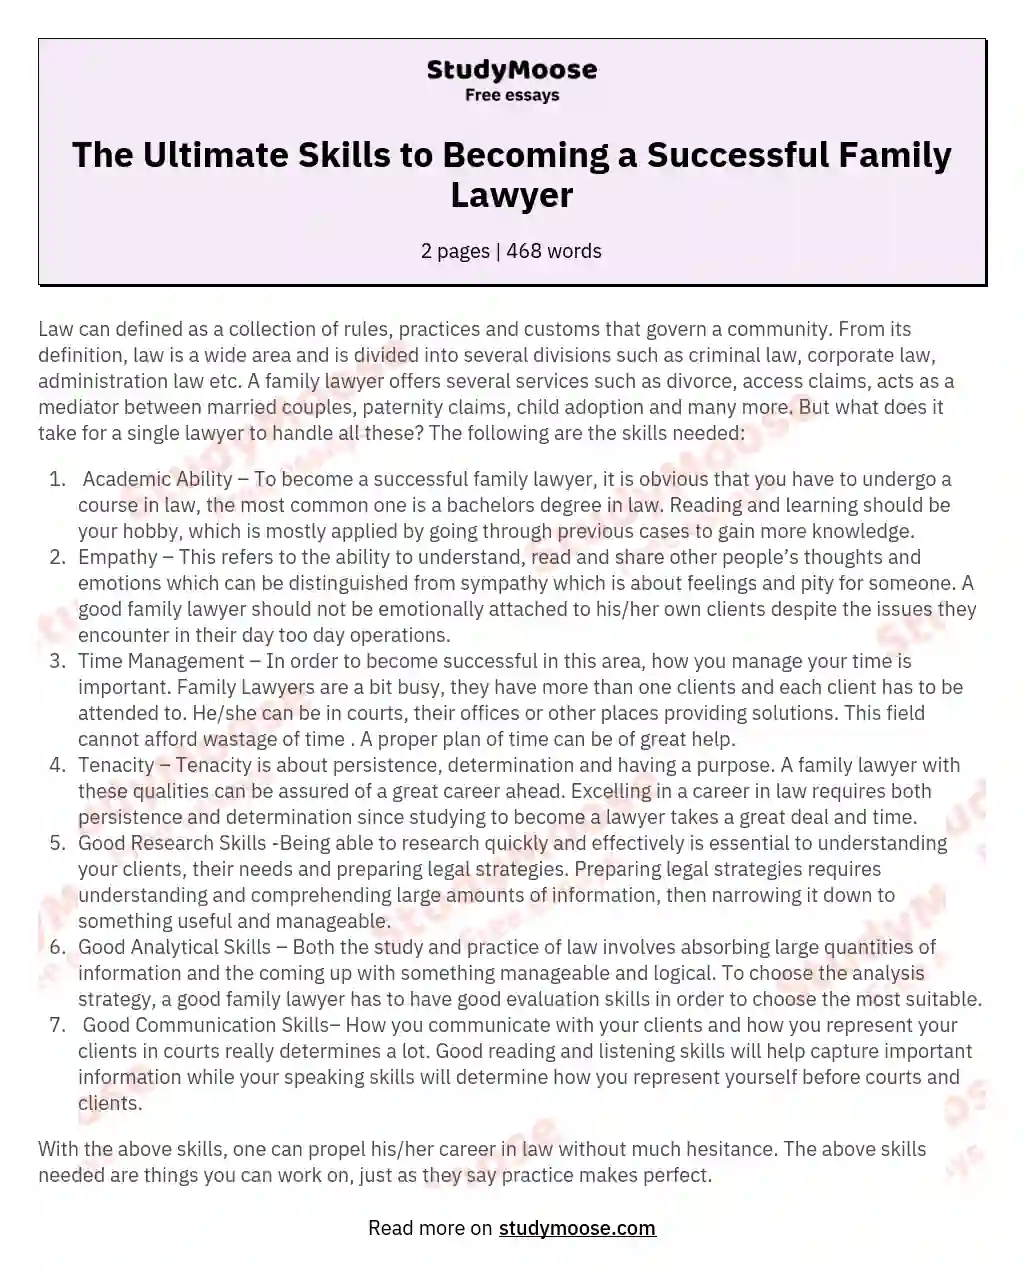 The Ultimate Skills to Becoming a Successful Family Lawyer essay